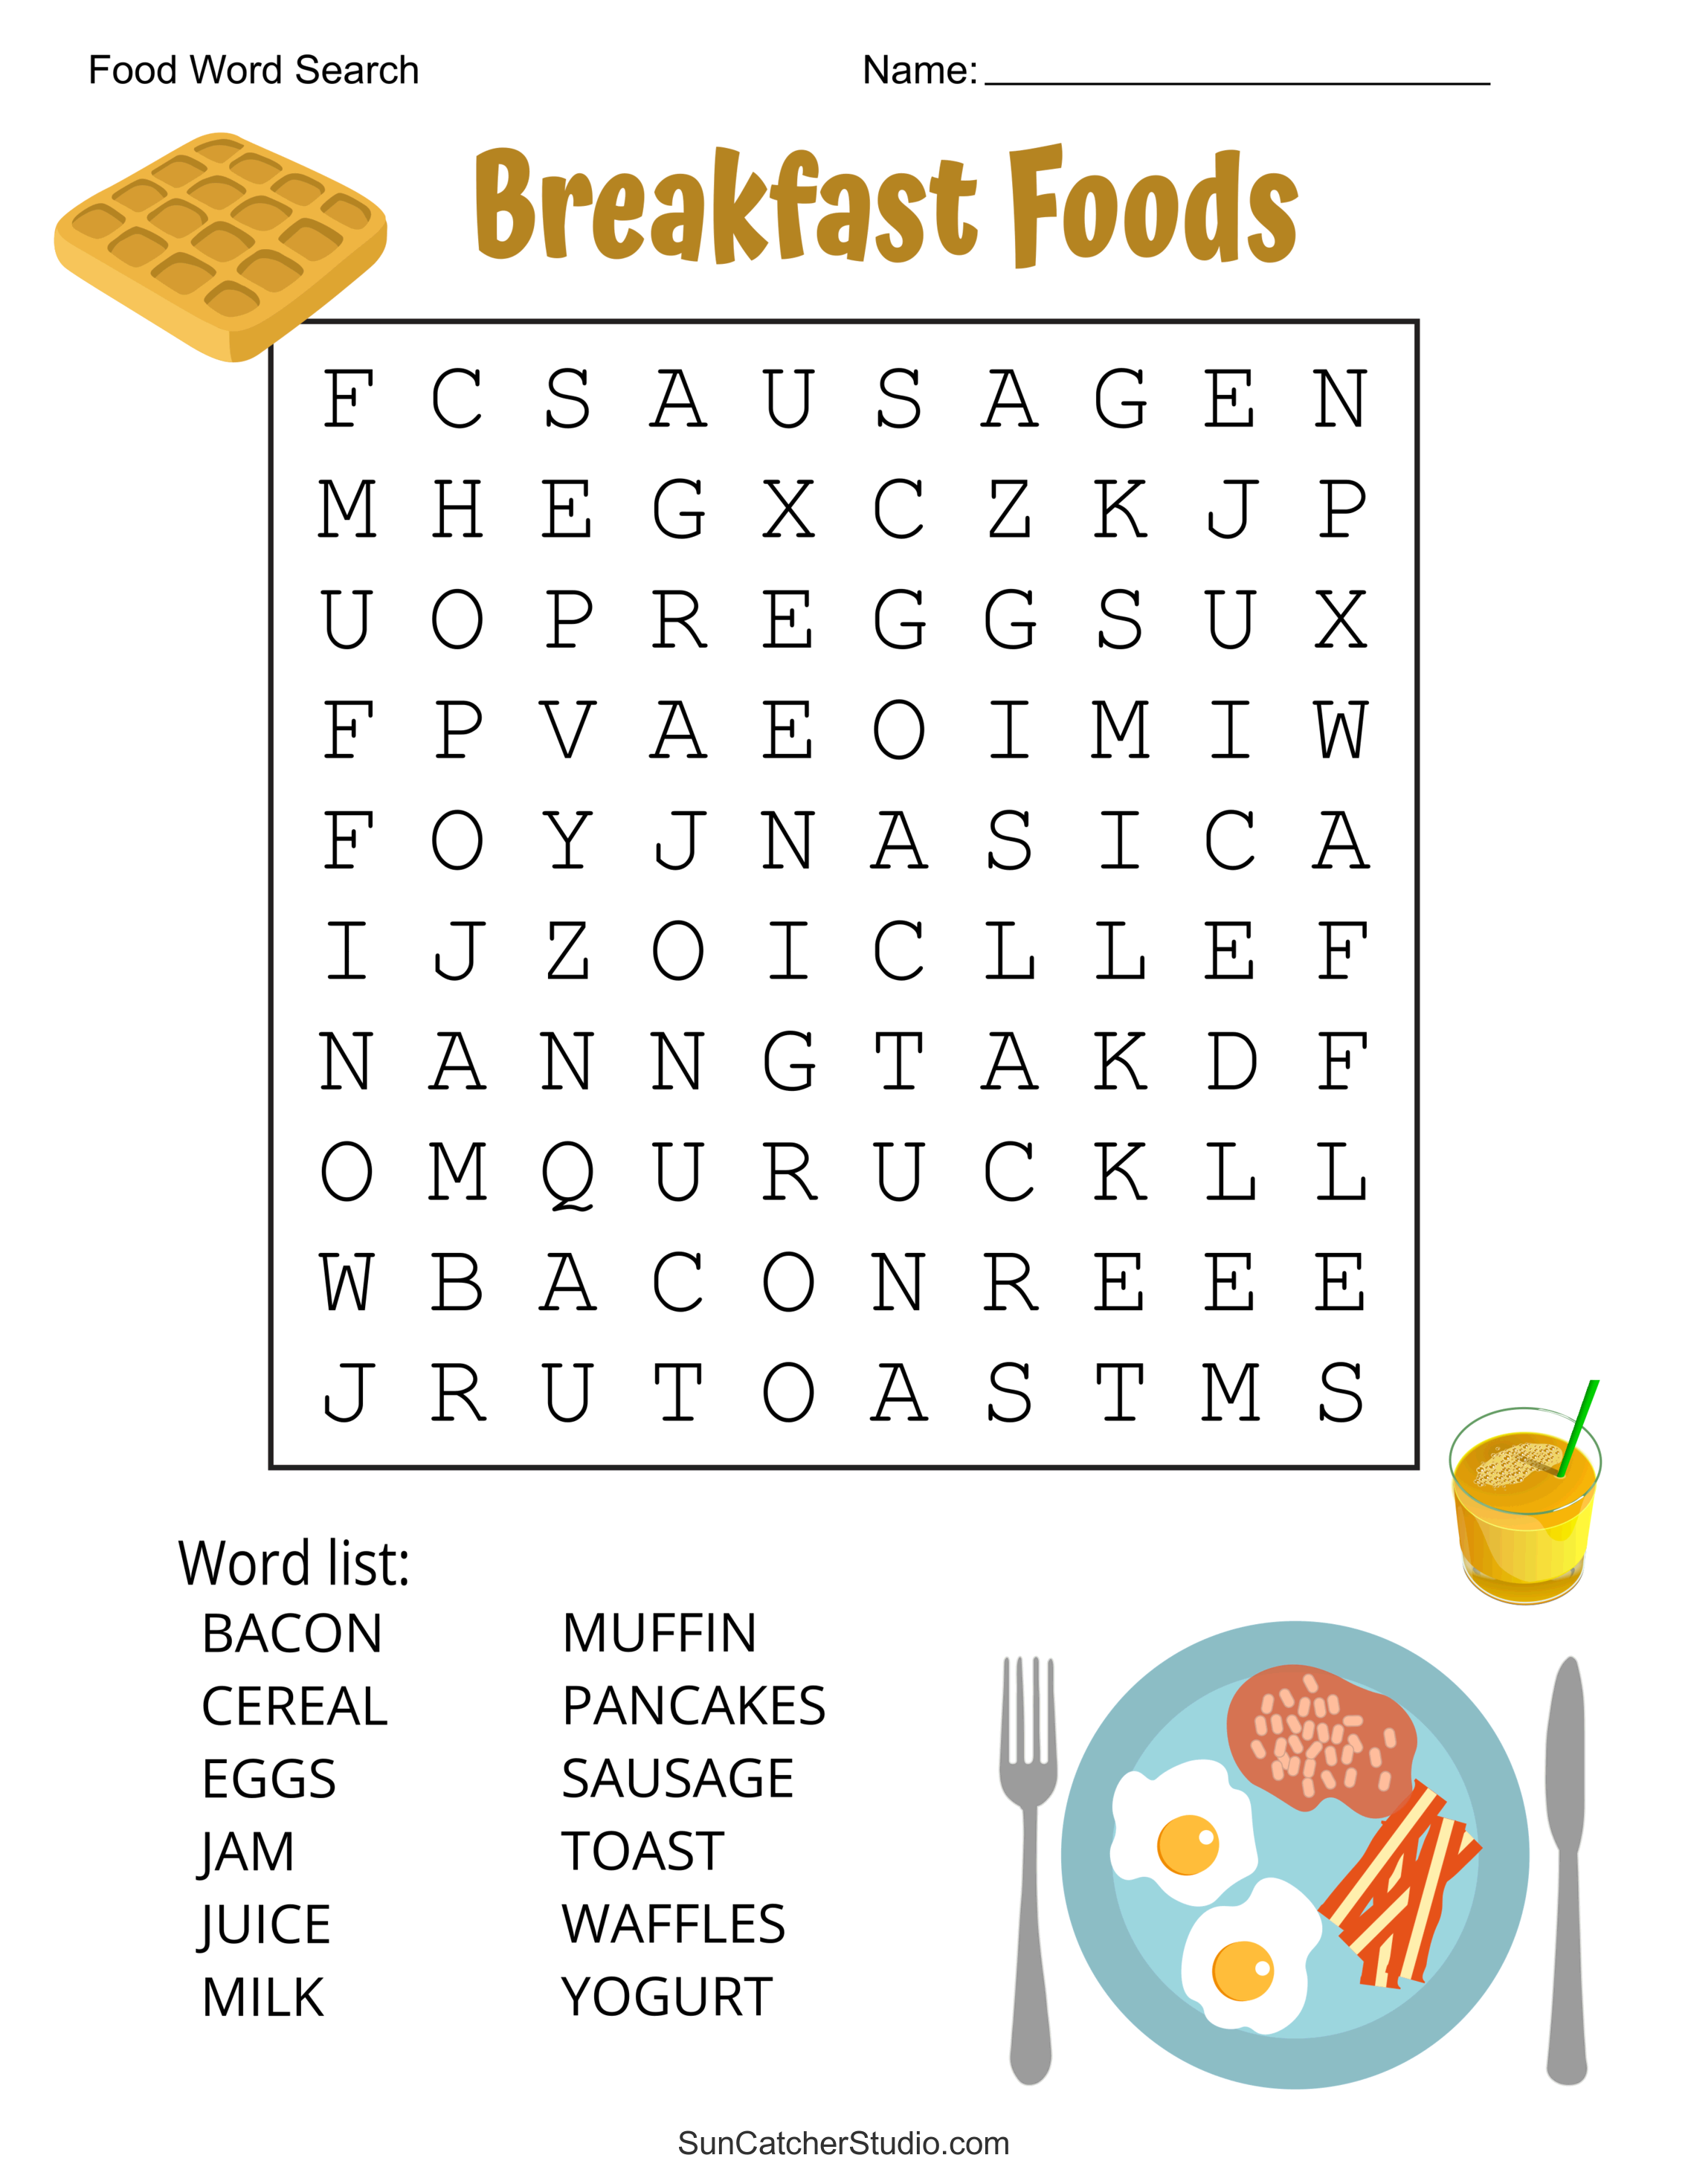 Food Word Search (Free Printable Puzzles) – DIY Projects, Patterns ...